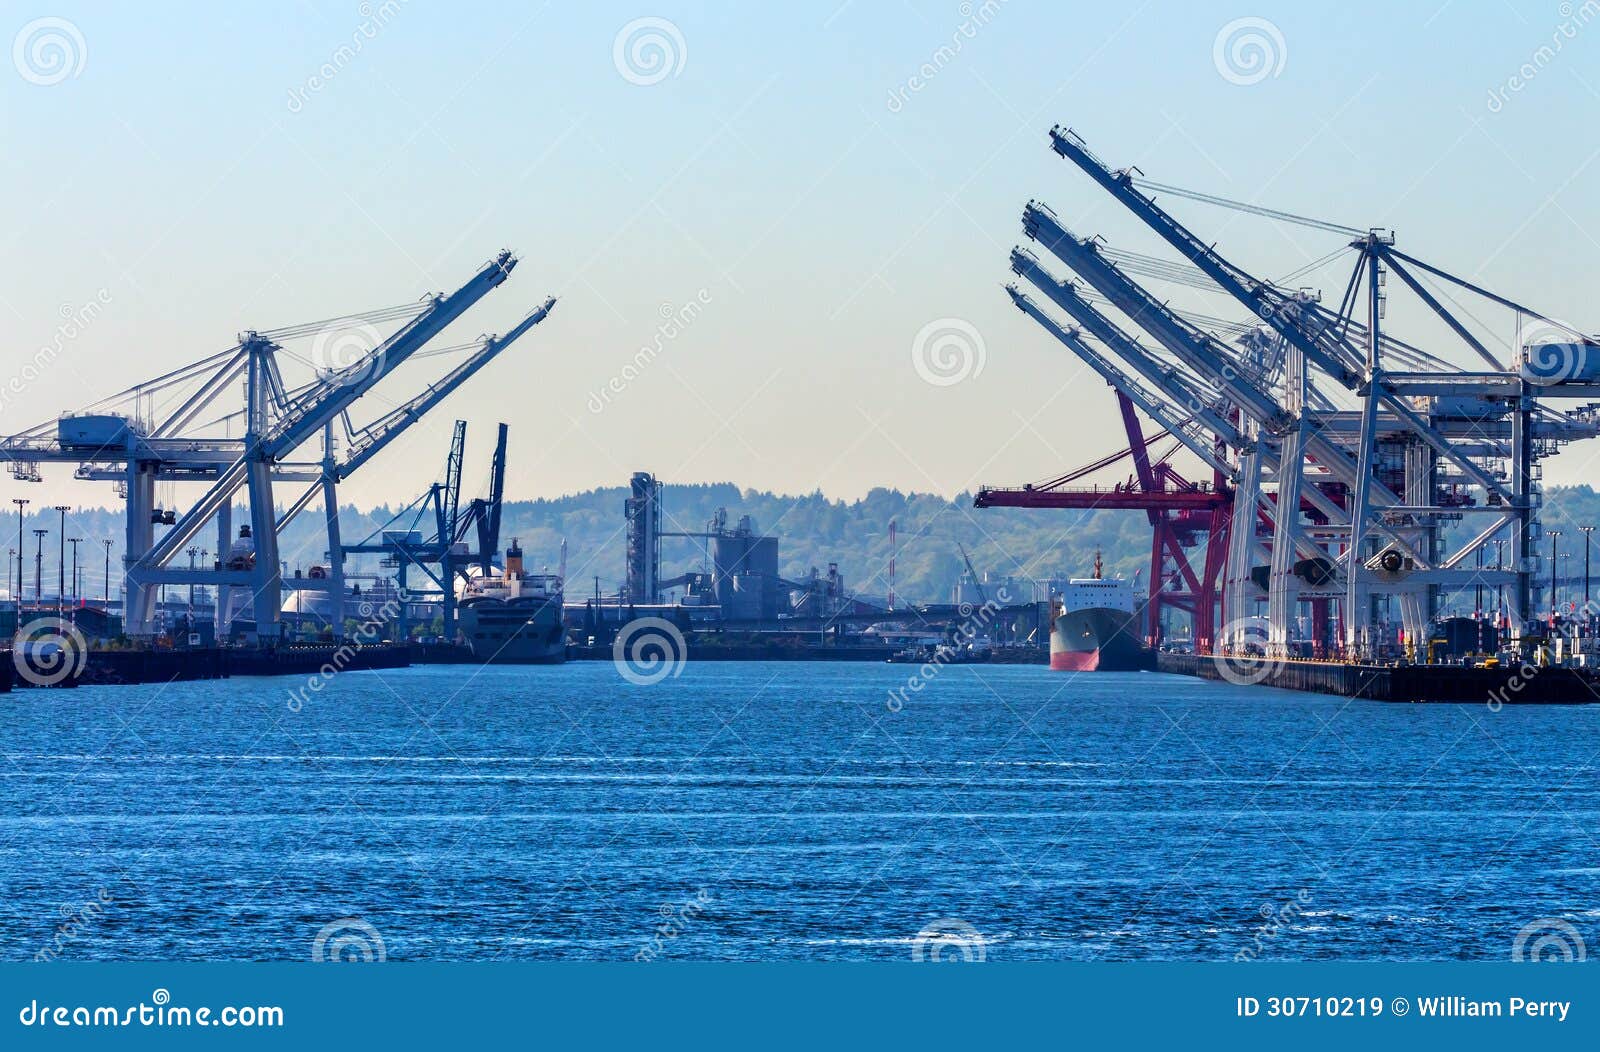 seattle washington port with red white cranes and freighters